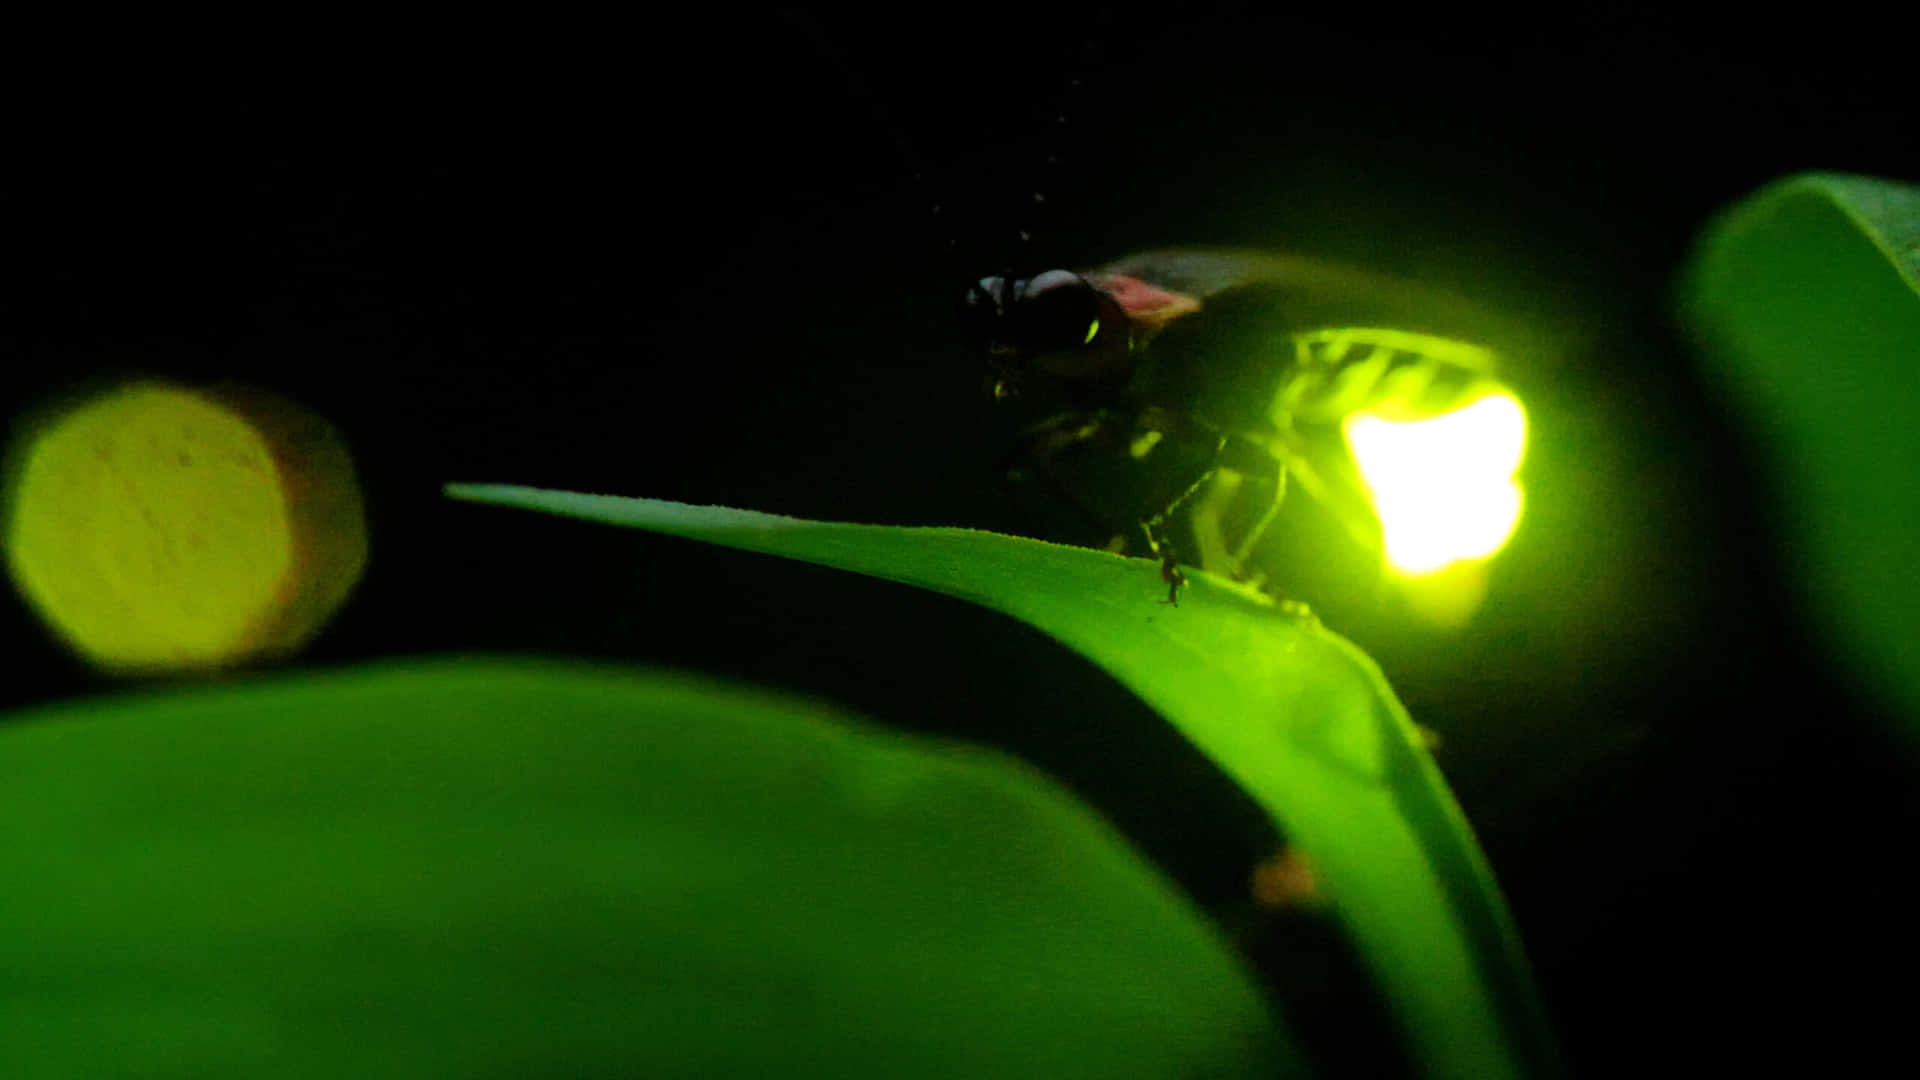 An incandescent display of fireflies, reminding us of the hope of warmer days to come.